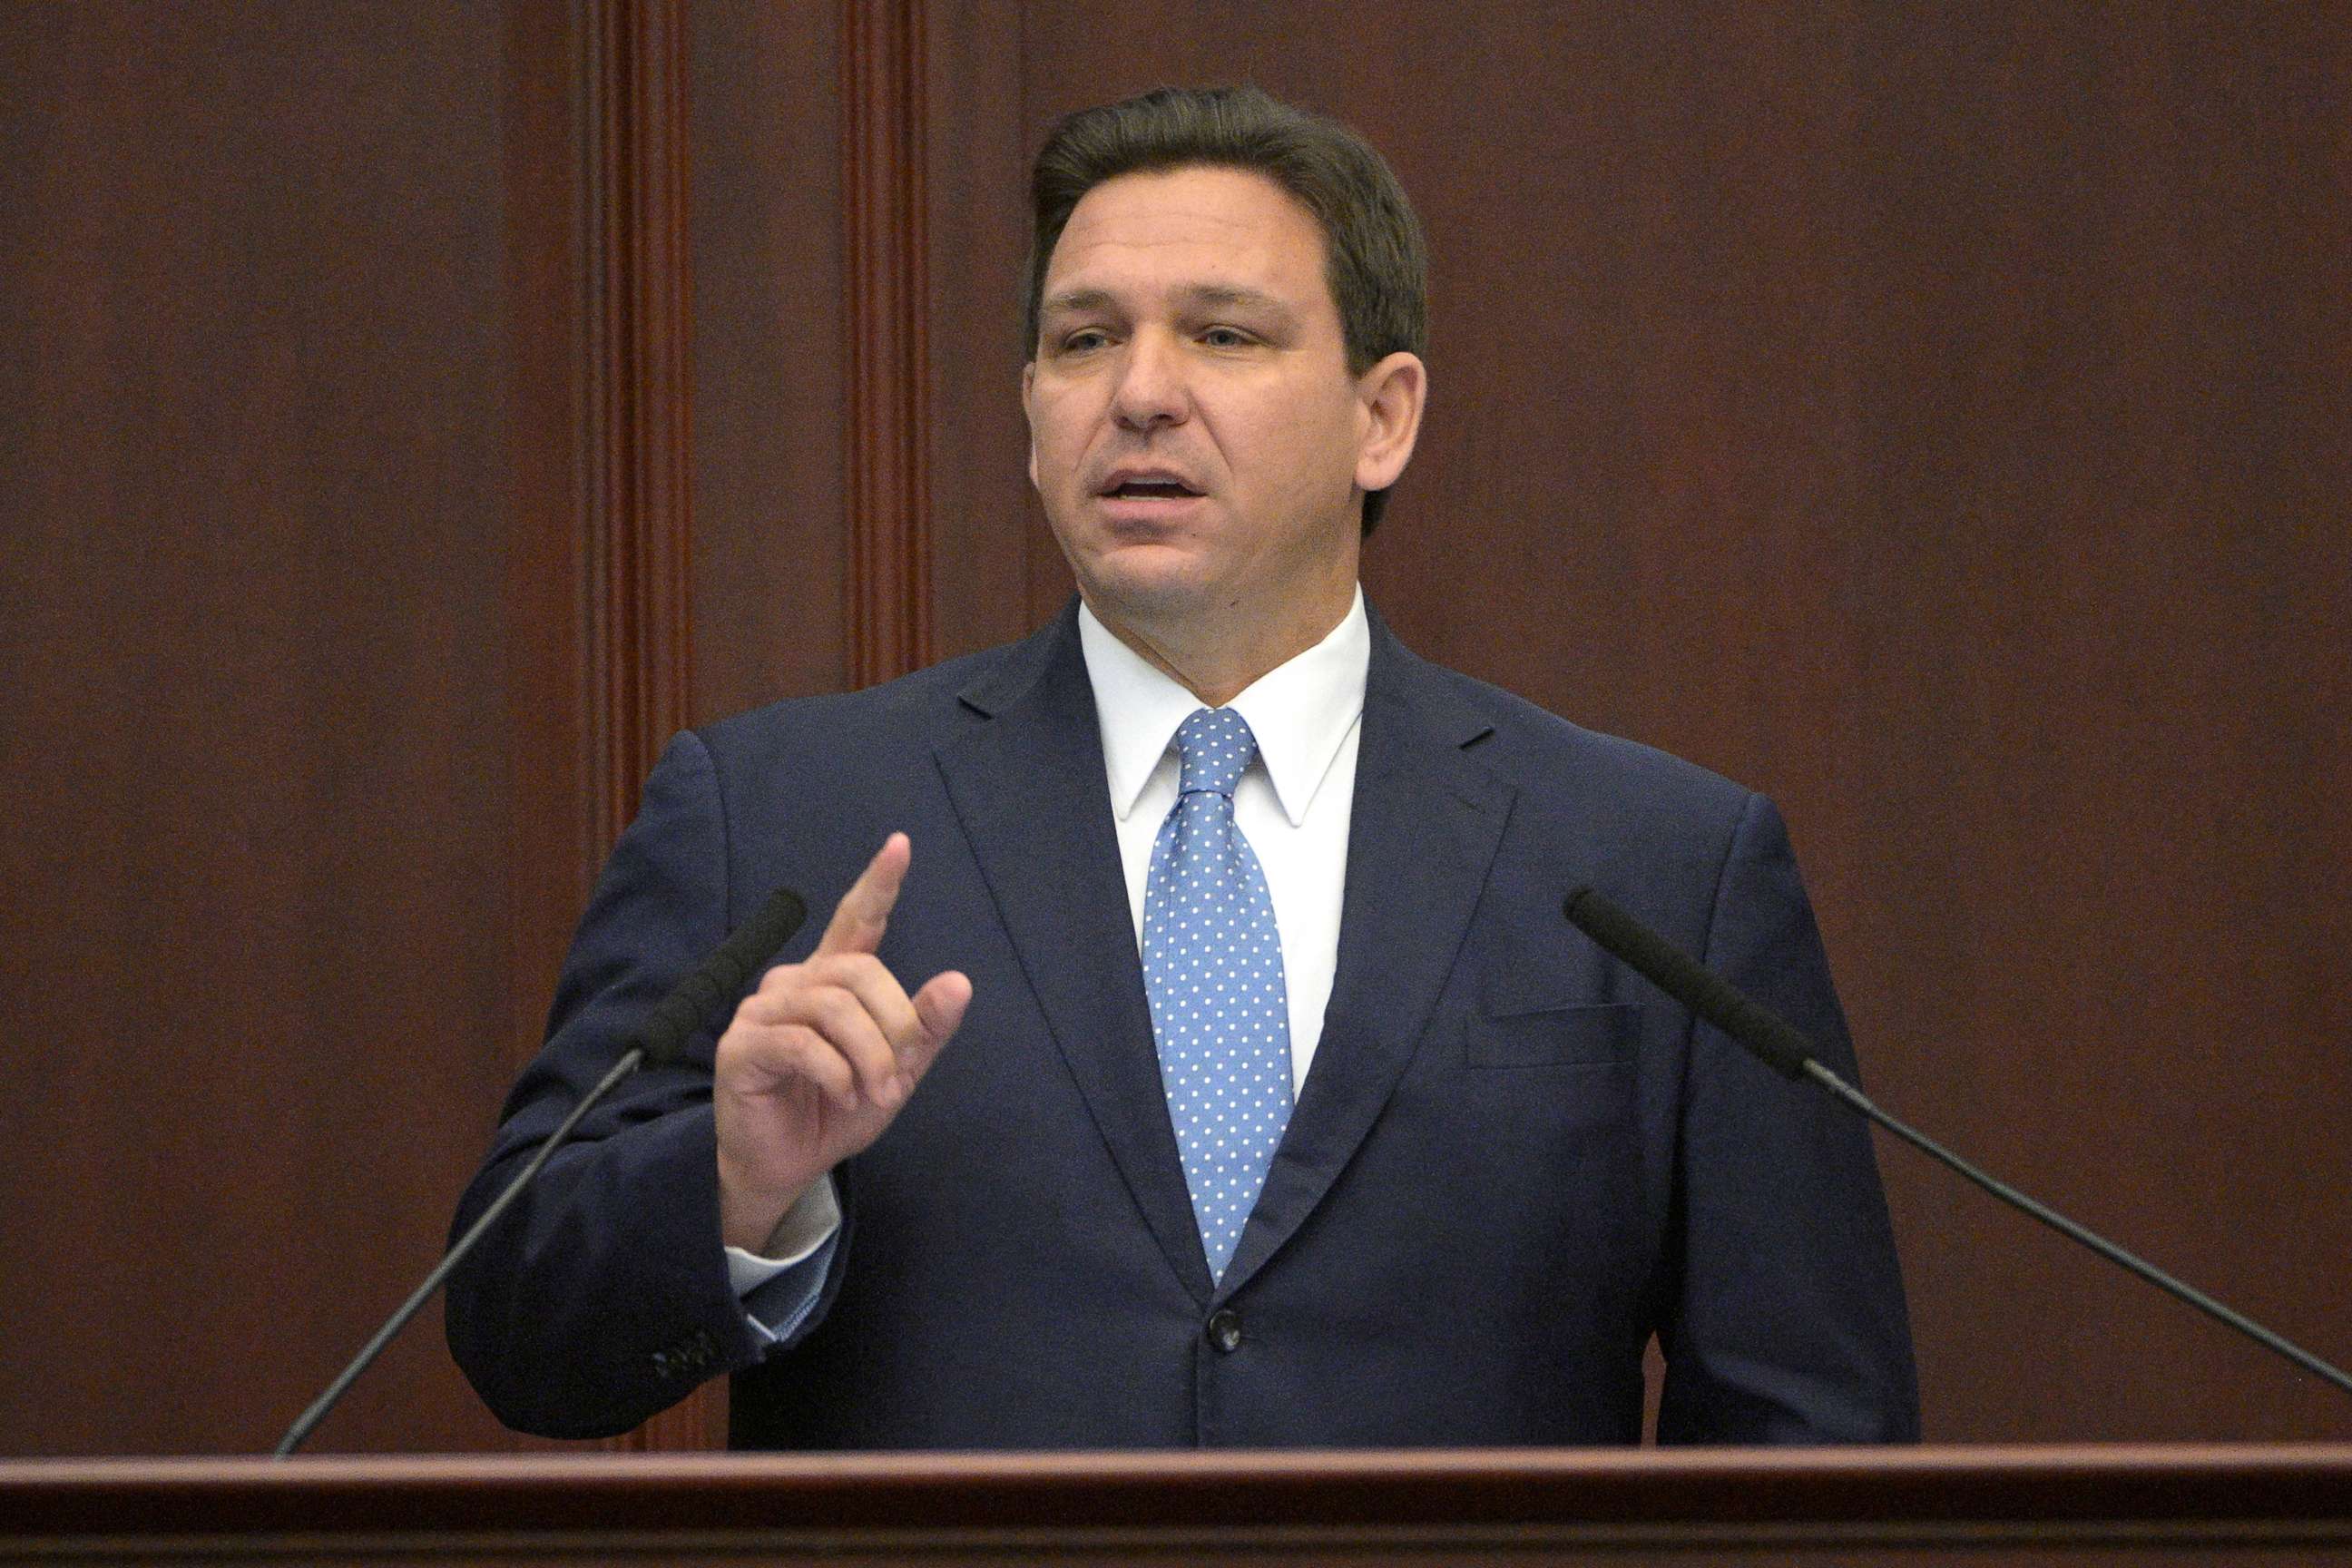 PHOTO: In this Jan. 11, 2022, Florida Gov. Ron DeSantis addresses a joint session of a legislative session in Tallahassee, Fla.